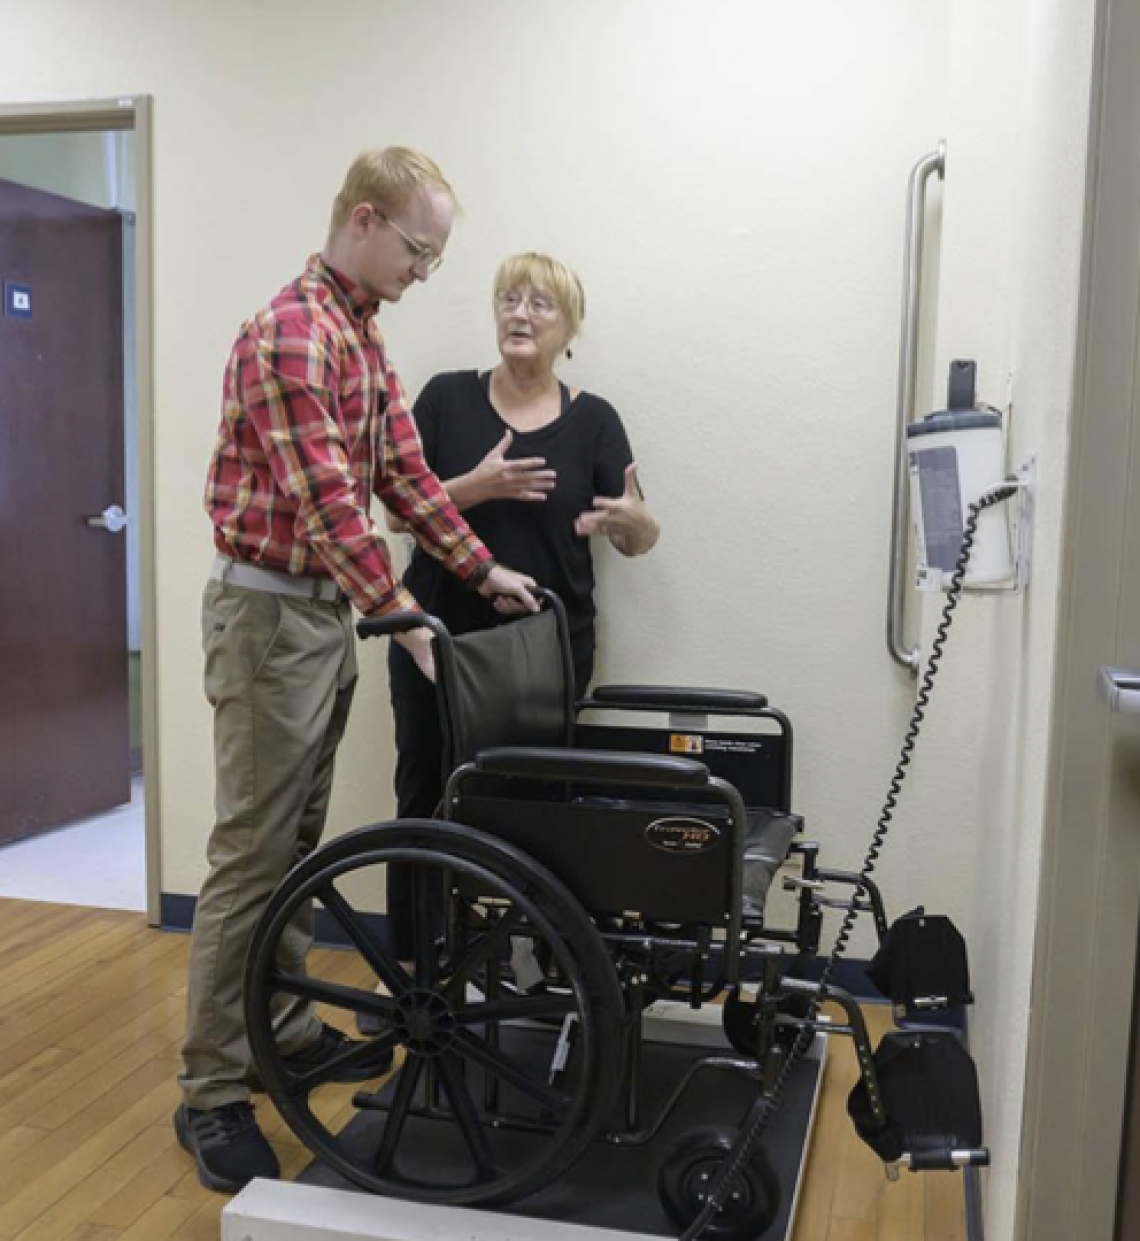 a gentleman is standing behind a wheelchair and holding onto its handles while a woman gestures with her hands beside him. The wheelchair is on a scale.